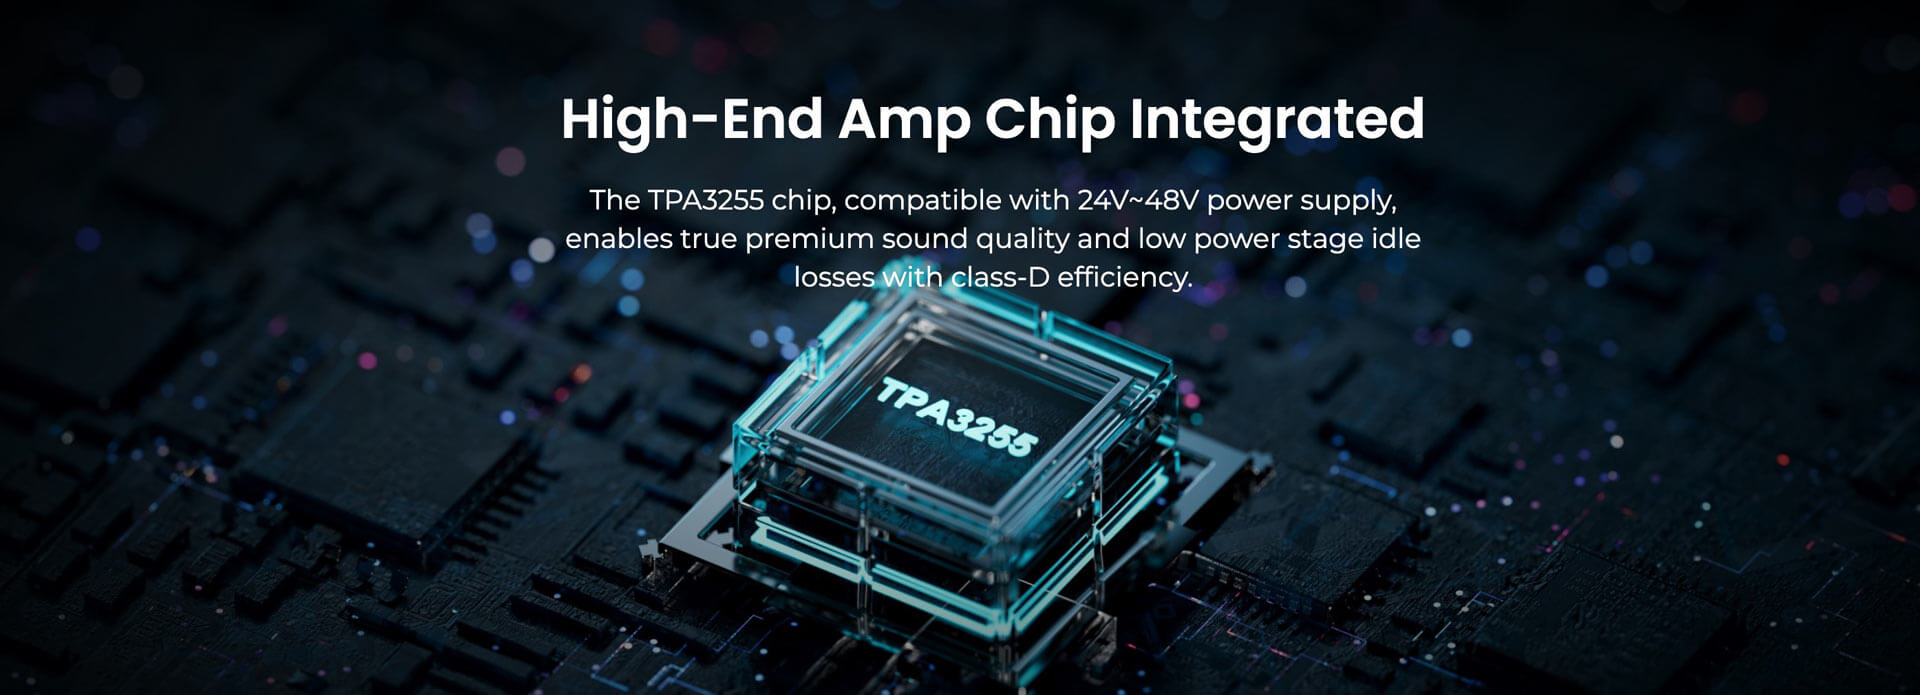 High-End Amp Chip Integrated